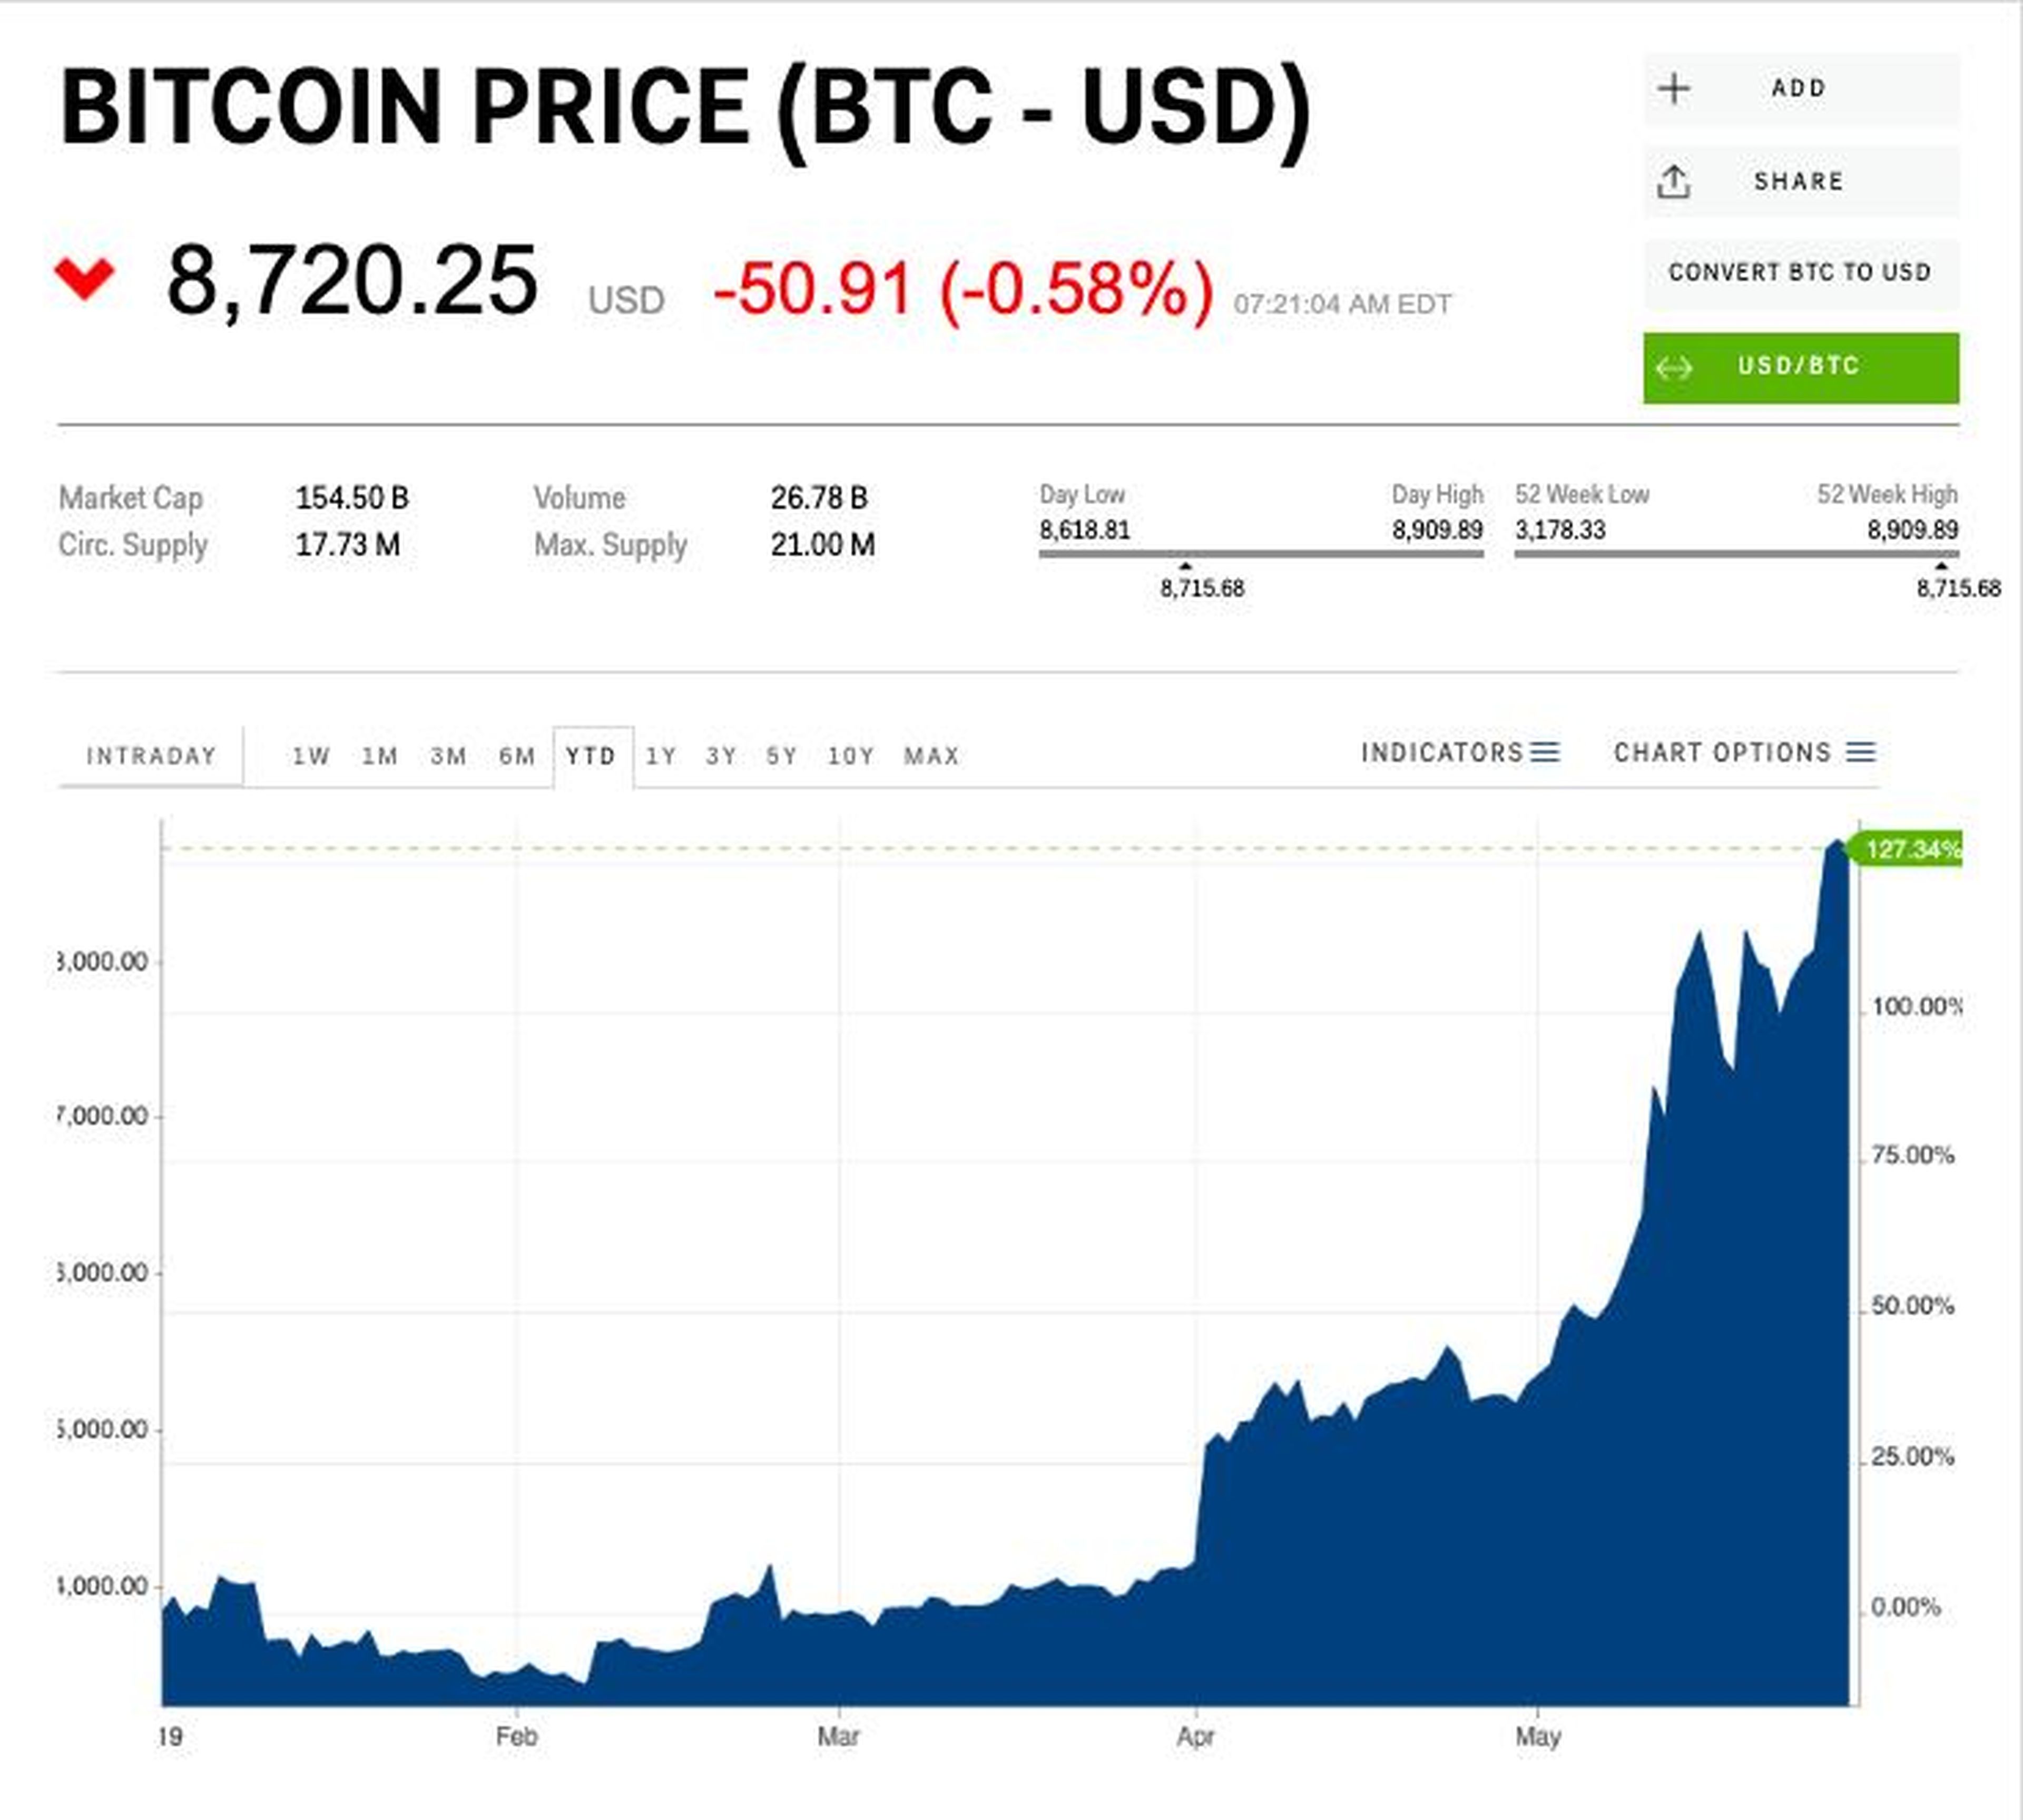 Bitcoin could surge past $10,000 within 2 weeks, analyst says